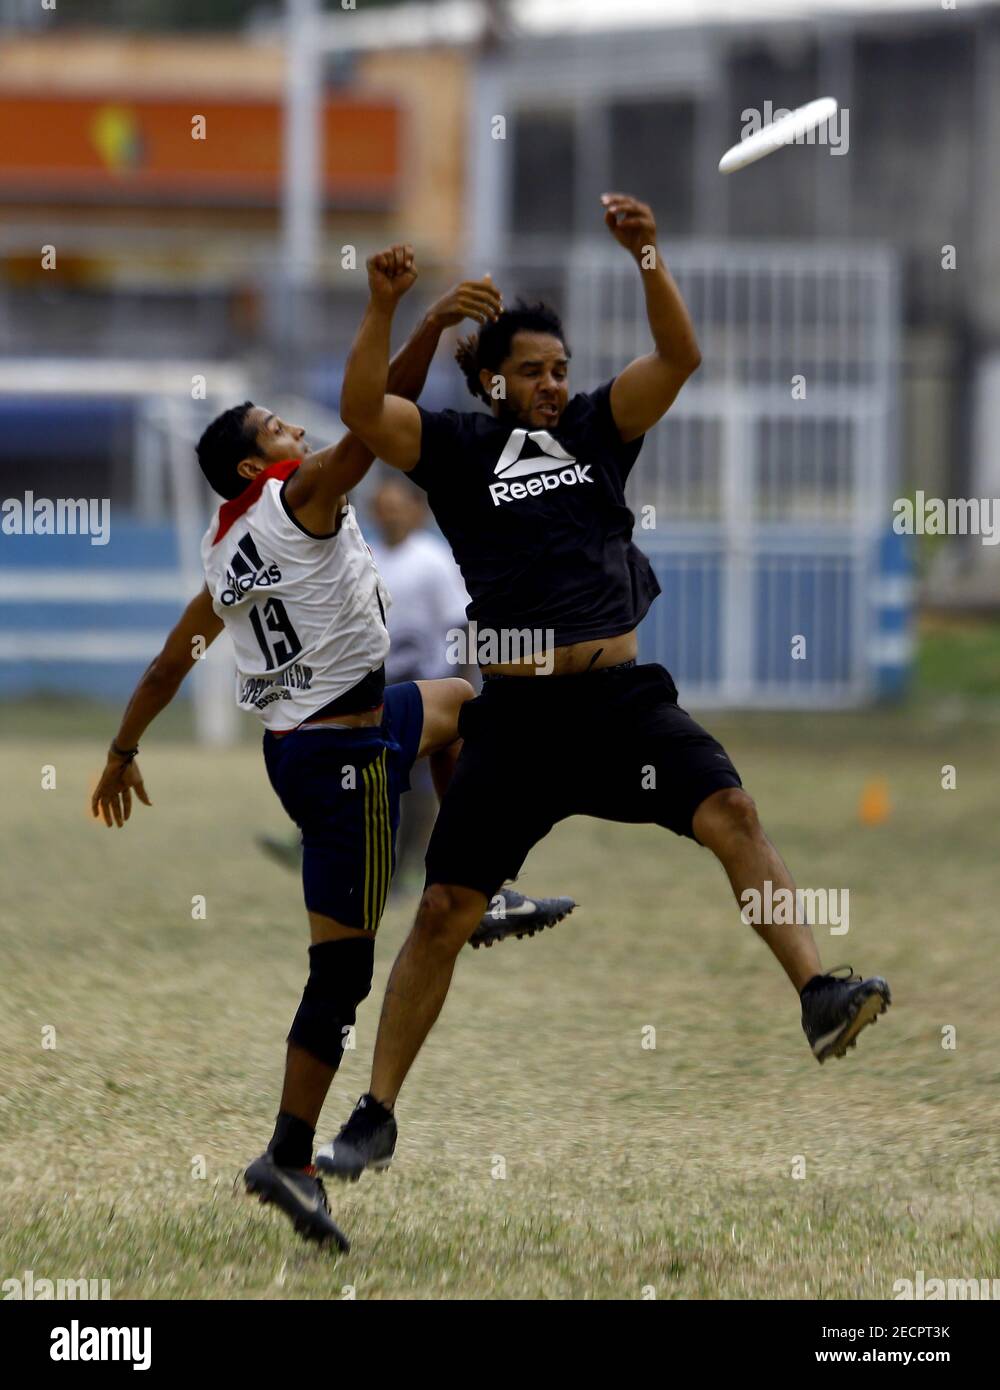 Valencia, Carabobo, Venezuela. 13th Feb, 2021. February 13, 2021. Ultimate  or Frisbee is a non-contact, self-arbitrating team sport played with a  flying disc (or Frisbee Âª). It brings together elements of soccer,